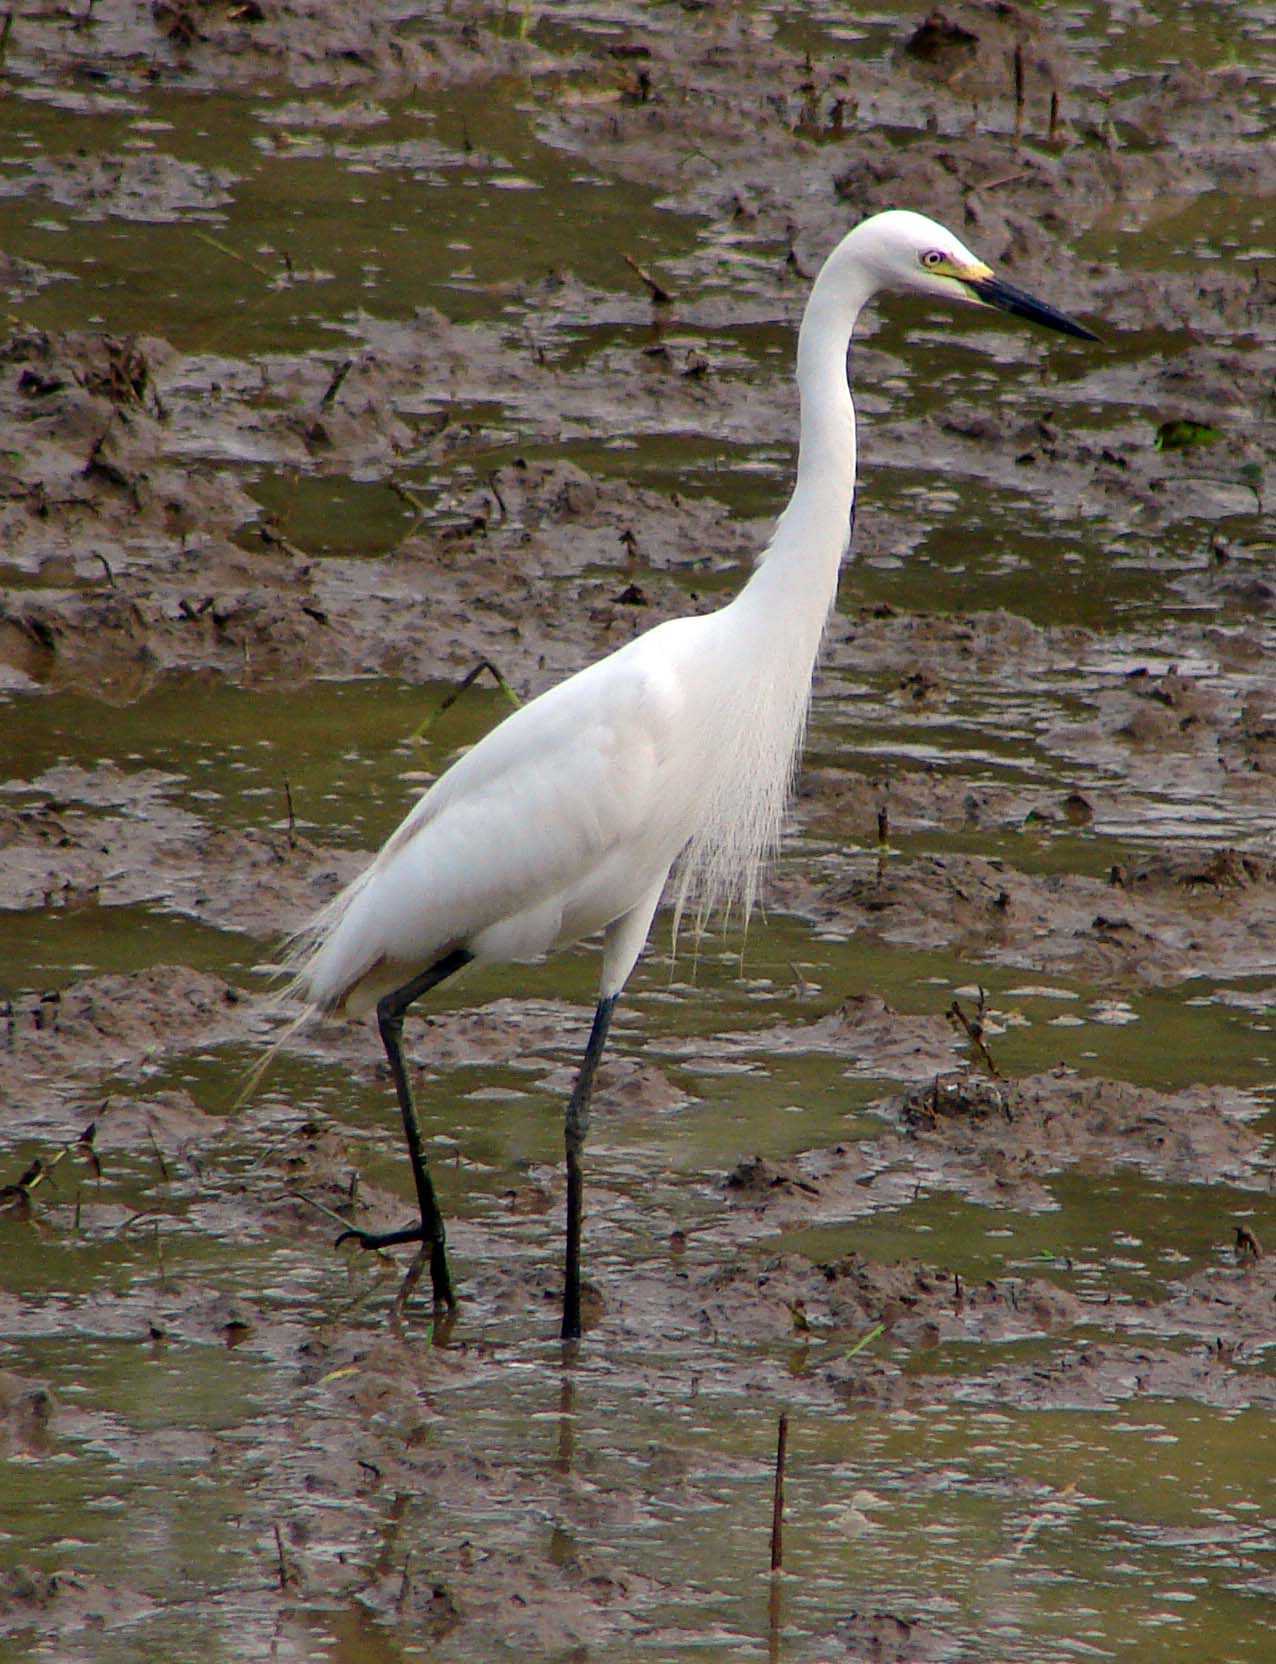 a white crane with long feathers standing in mud